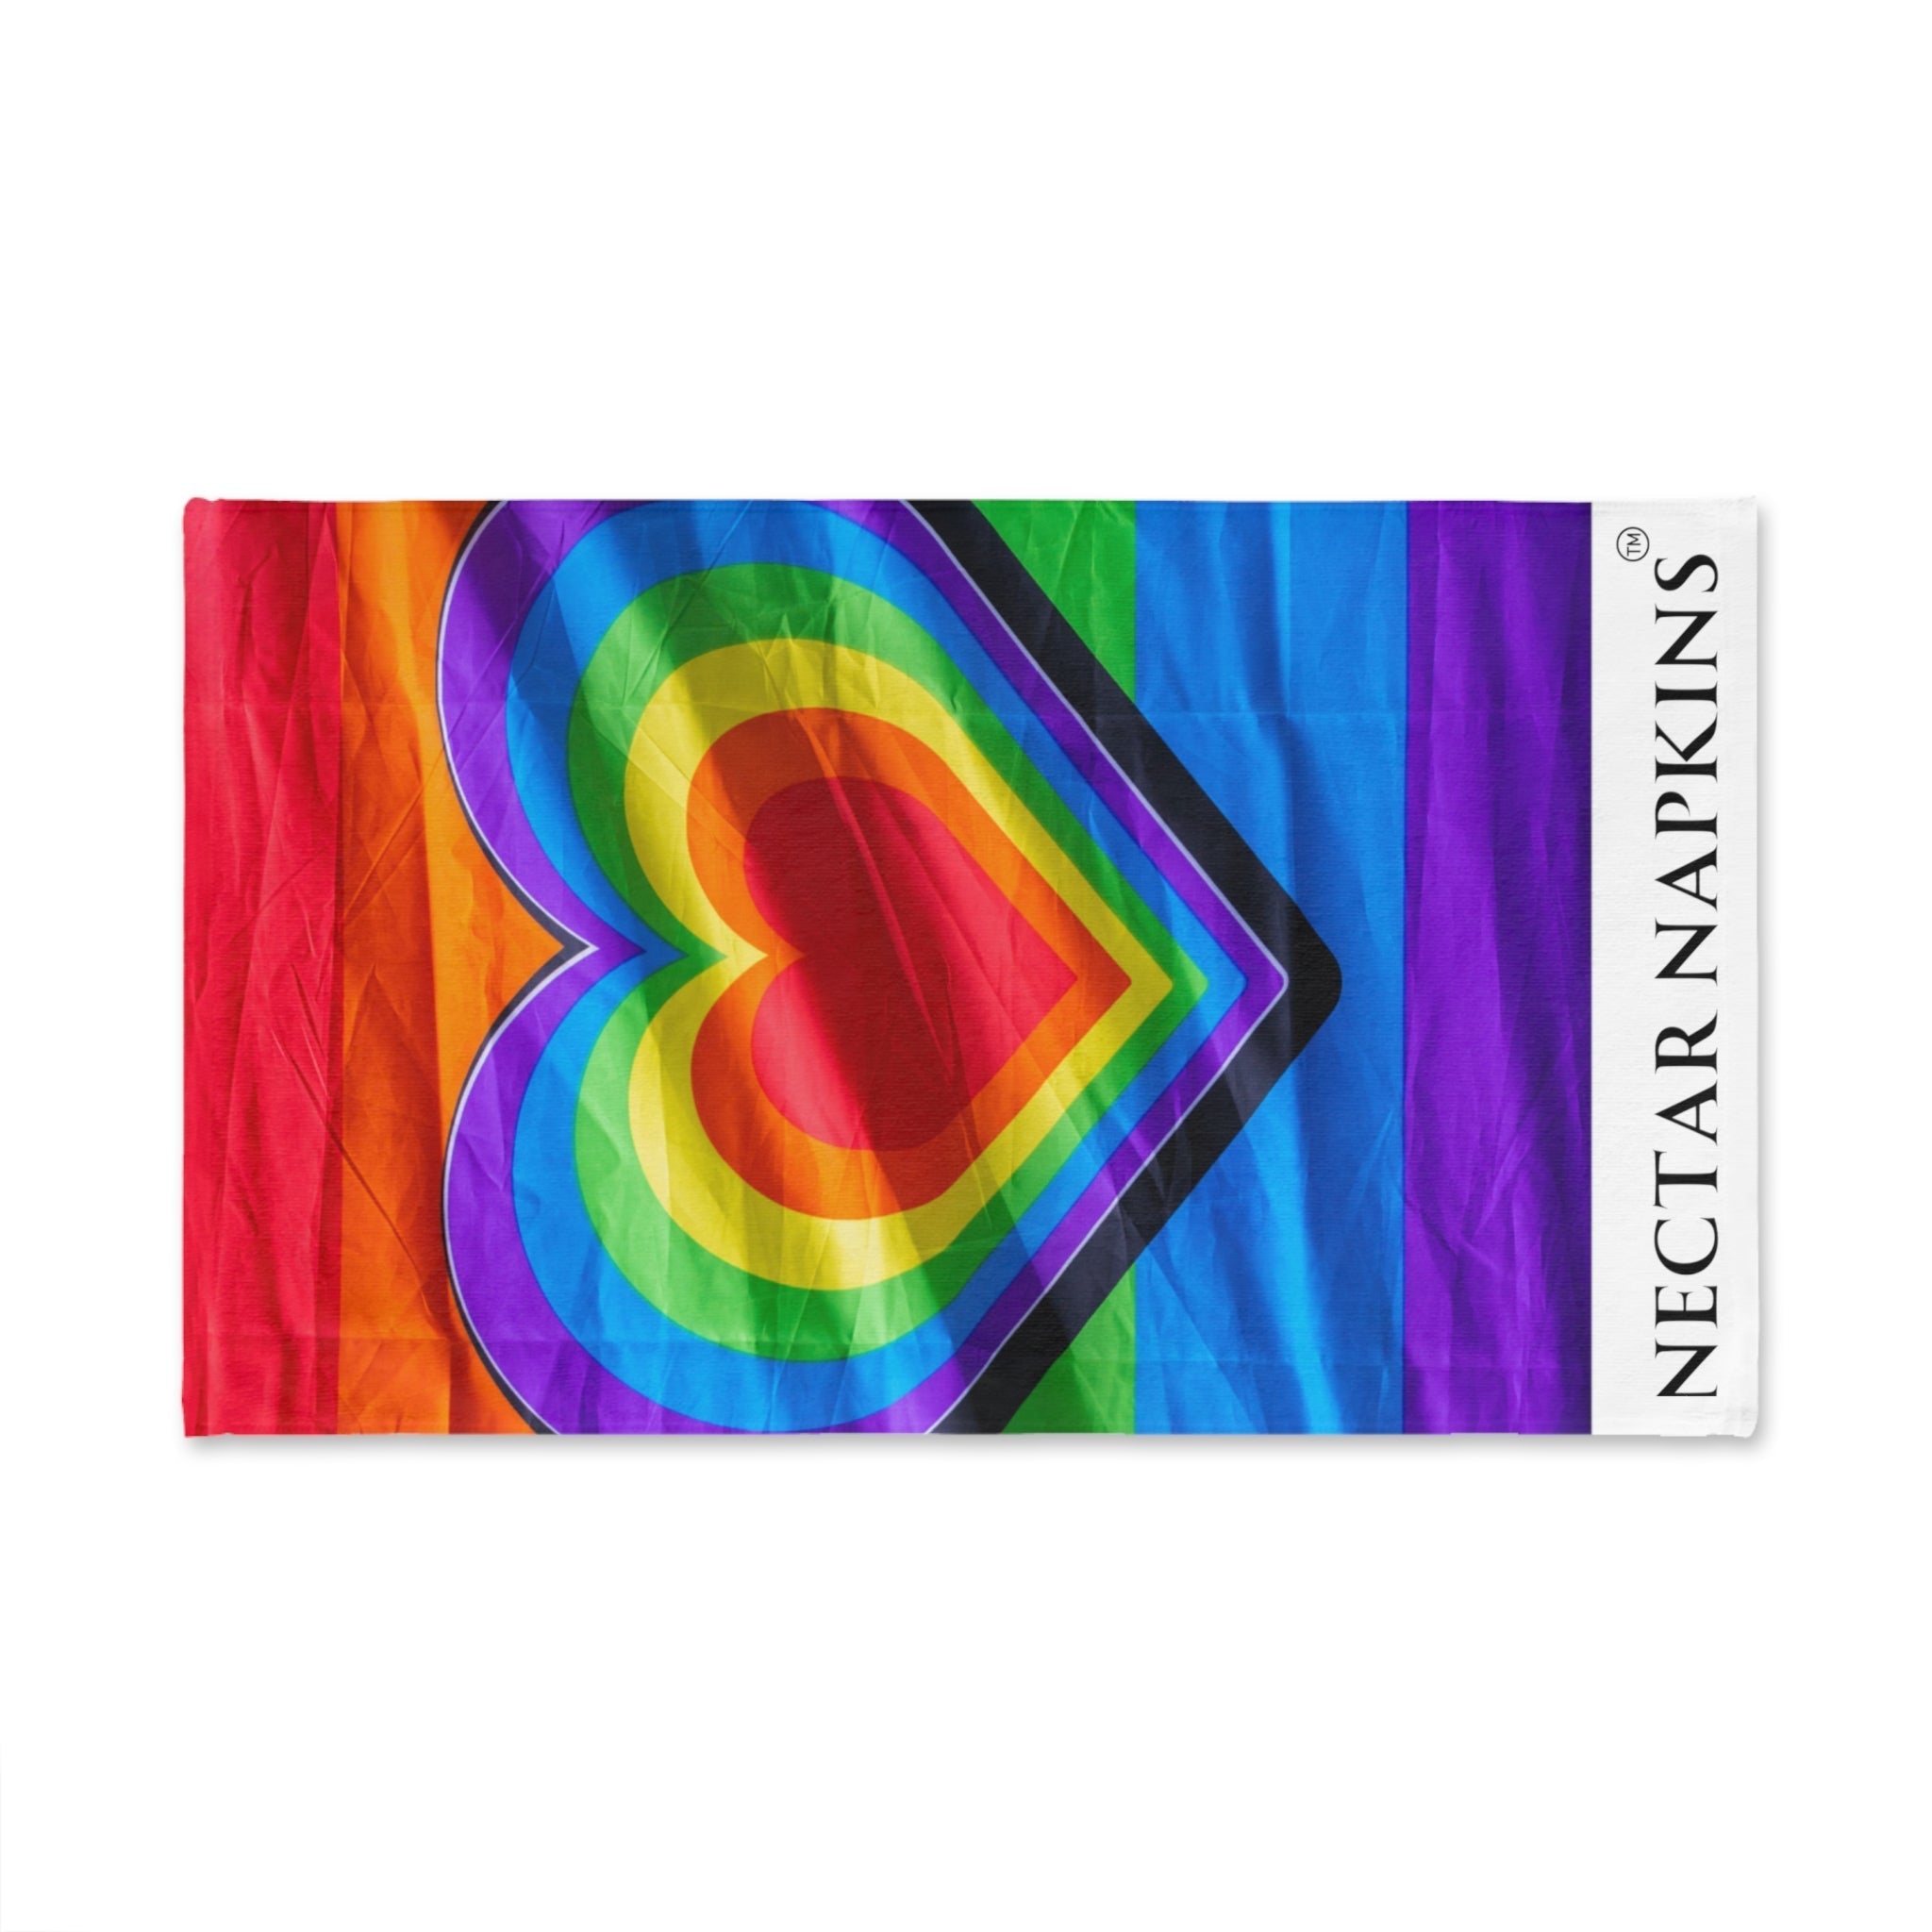 Rain Bow Heart 3D White | Funny Gifts for Men - Gifts for Him - Birthday Gifts for Men, Him, Her, Husband, Boyfriend, Girlfriend, New Couple Gifts, Fathers & Valentines Day Gifts, Christmas Gifts NECTAR NAPKINS